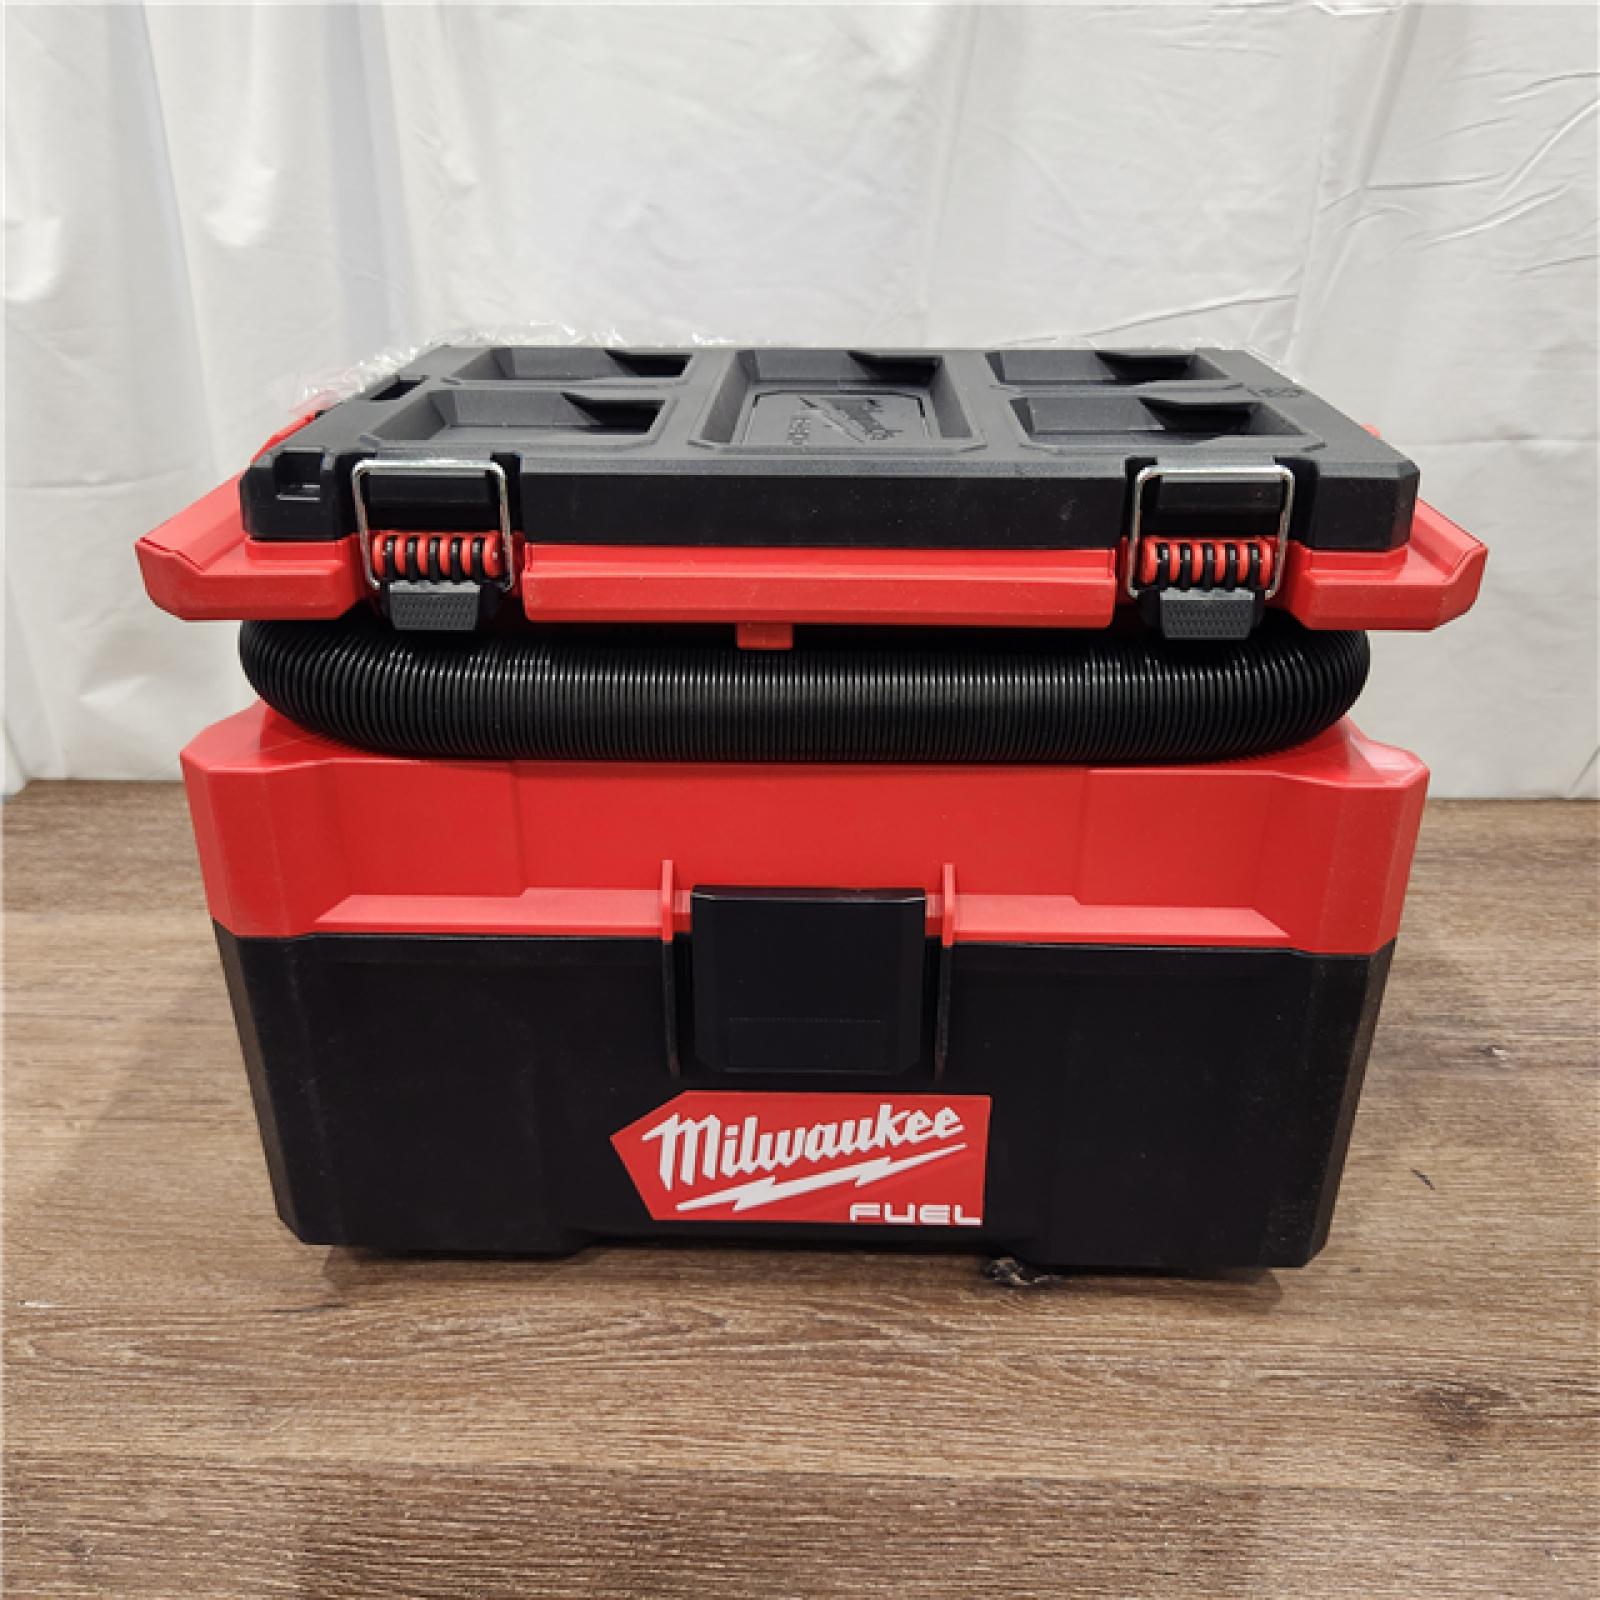 AS-IS M18 FUEL PACKOUT 18-Volt Lithium-Ion Cordless 2.5 Gal. Wet/Dry Vacuum (Vacuum-Only)